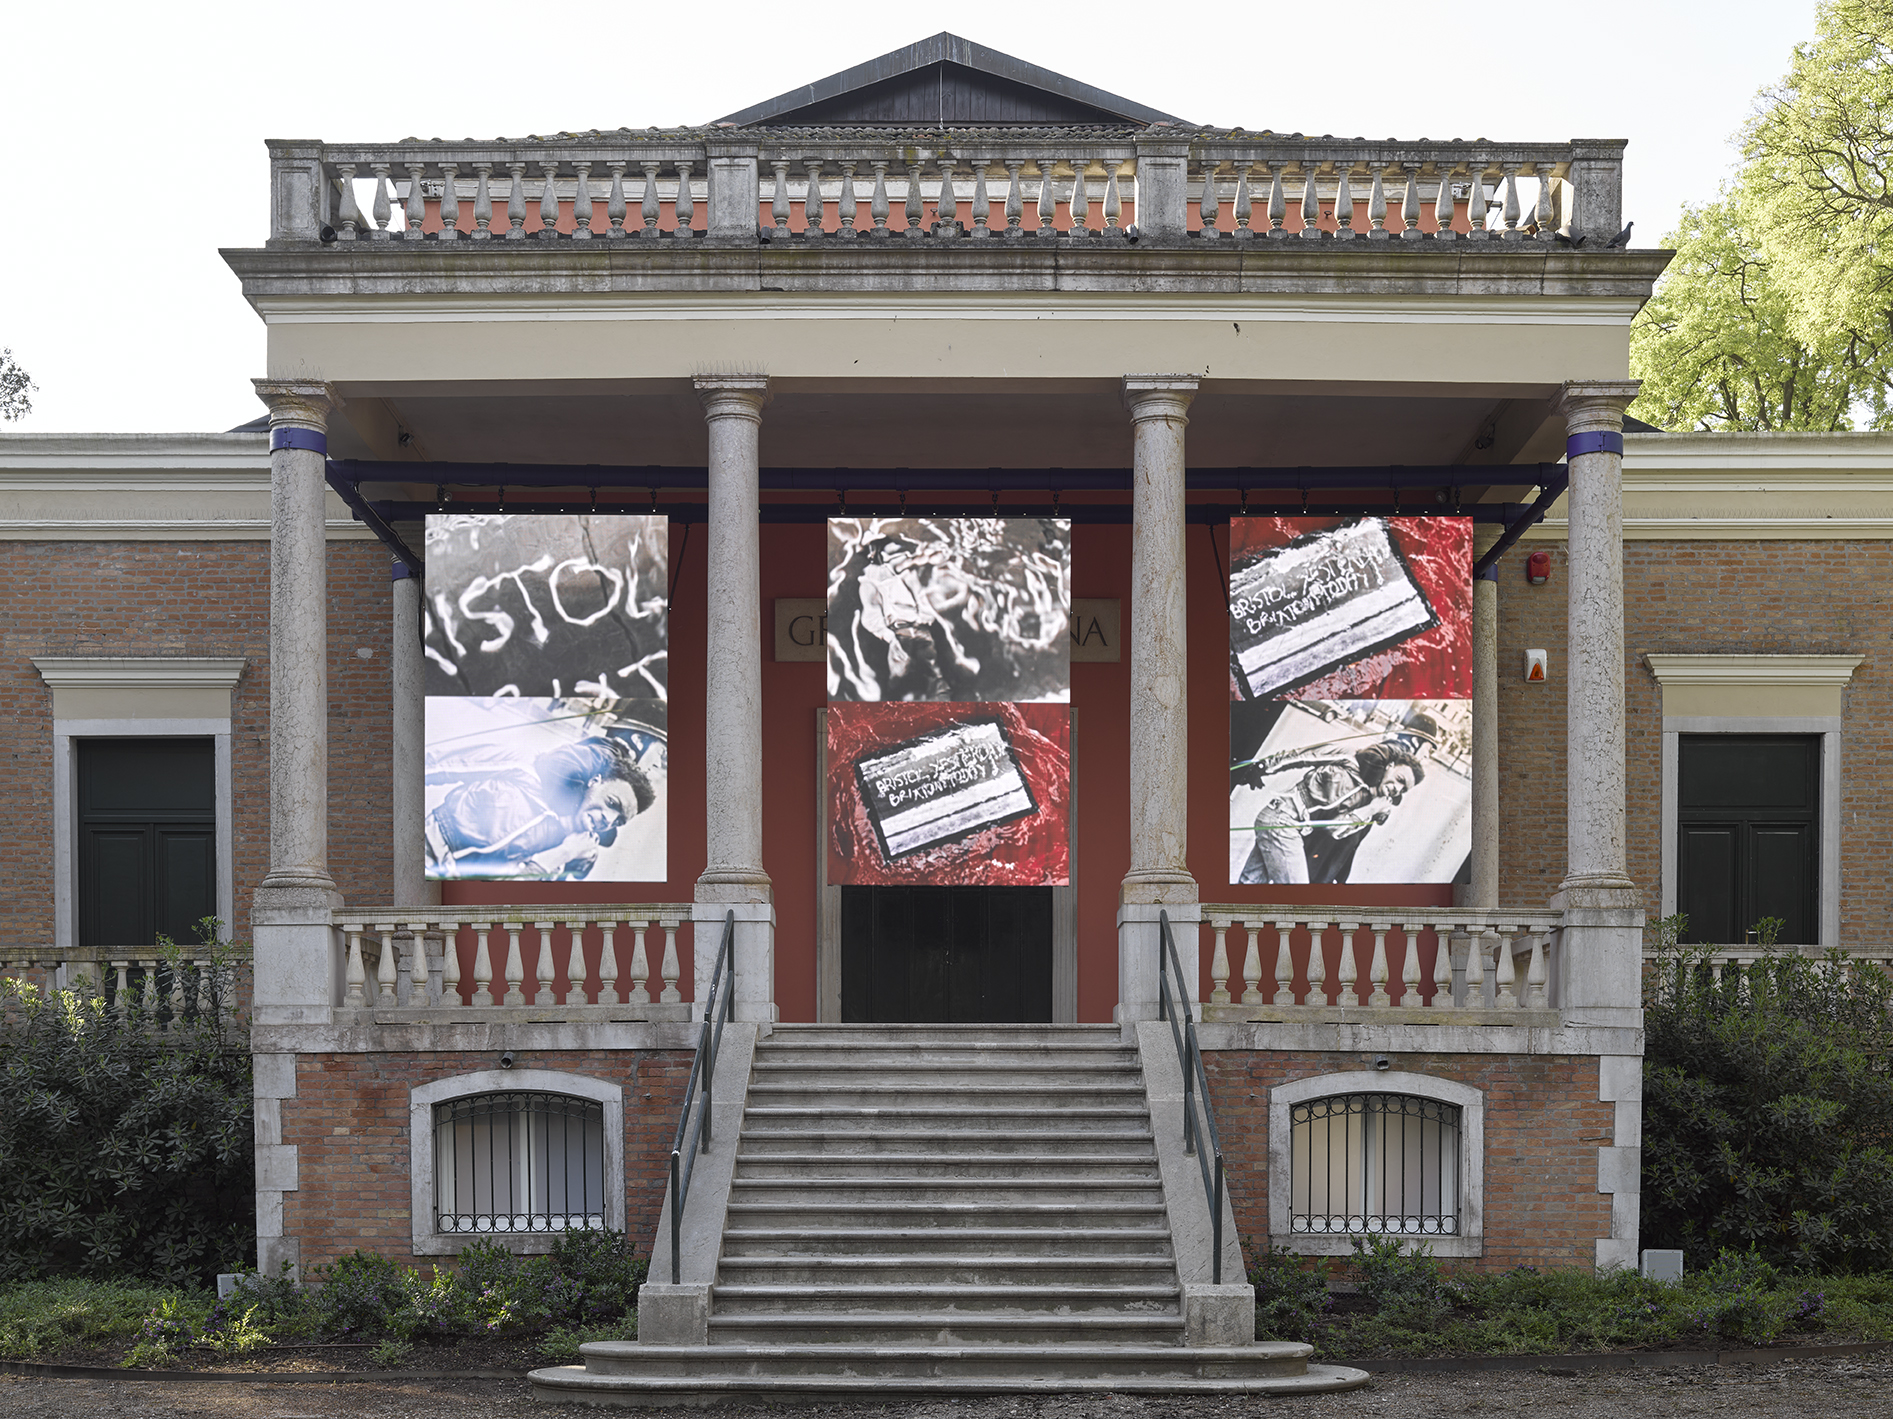 John Akomfrah- outside a large building with pillars and a staircase to the main door and red, white and black graffiti style painting hung on the exterior 